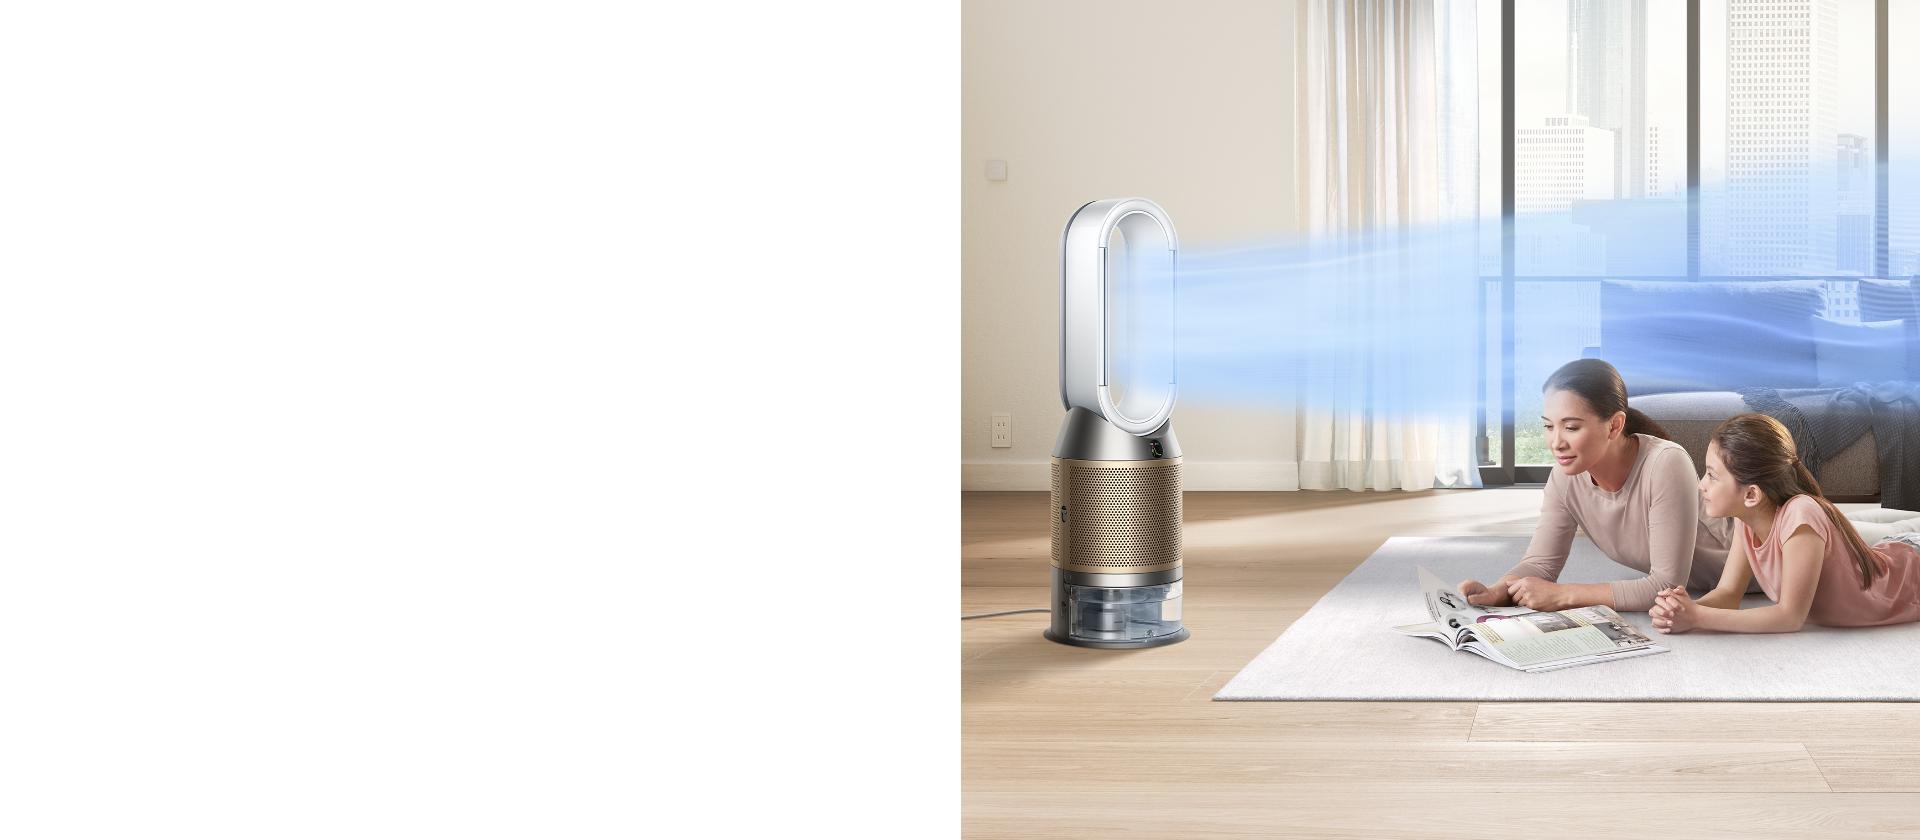 Family room with purifier humidifier projecting airflow